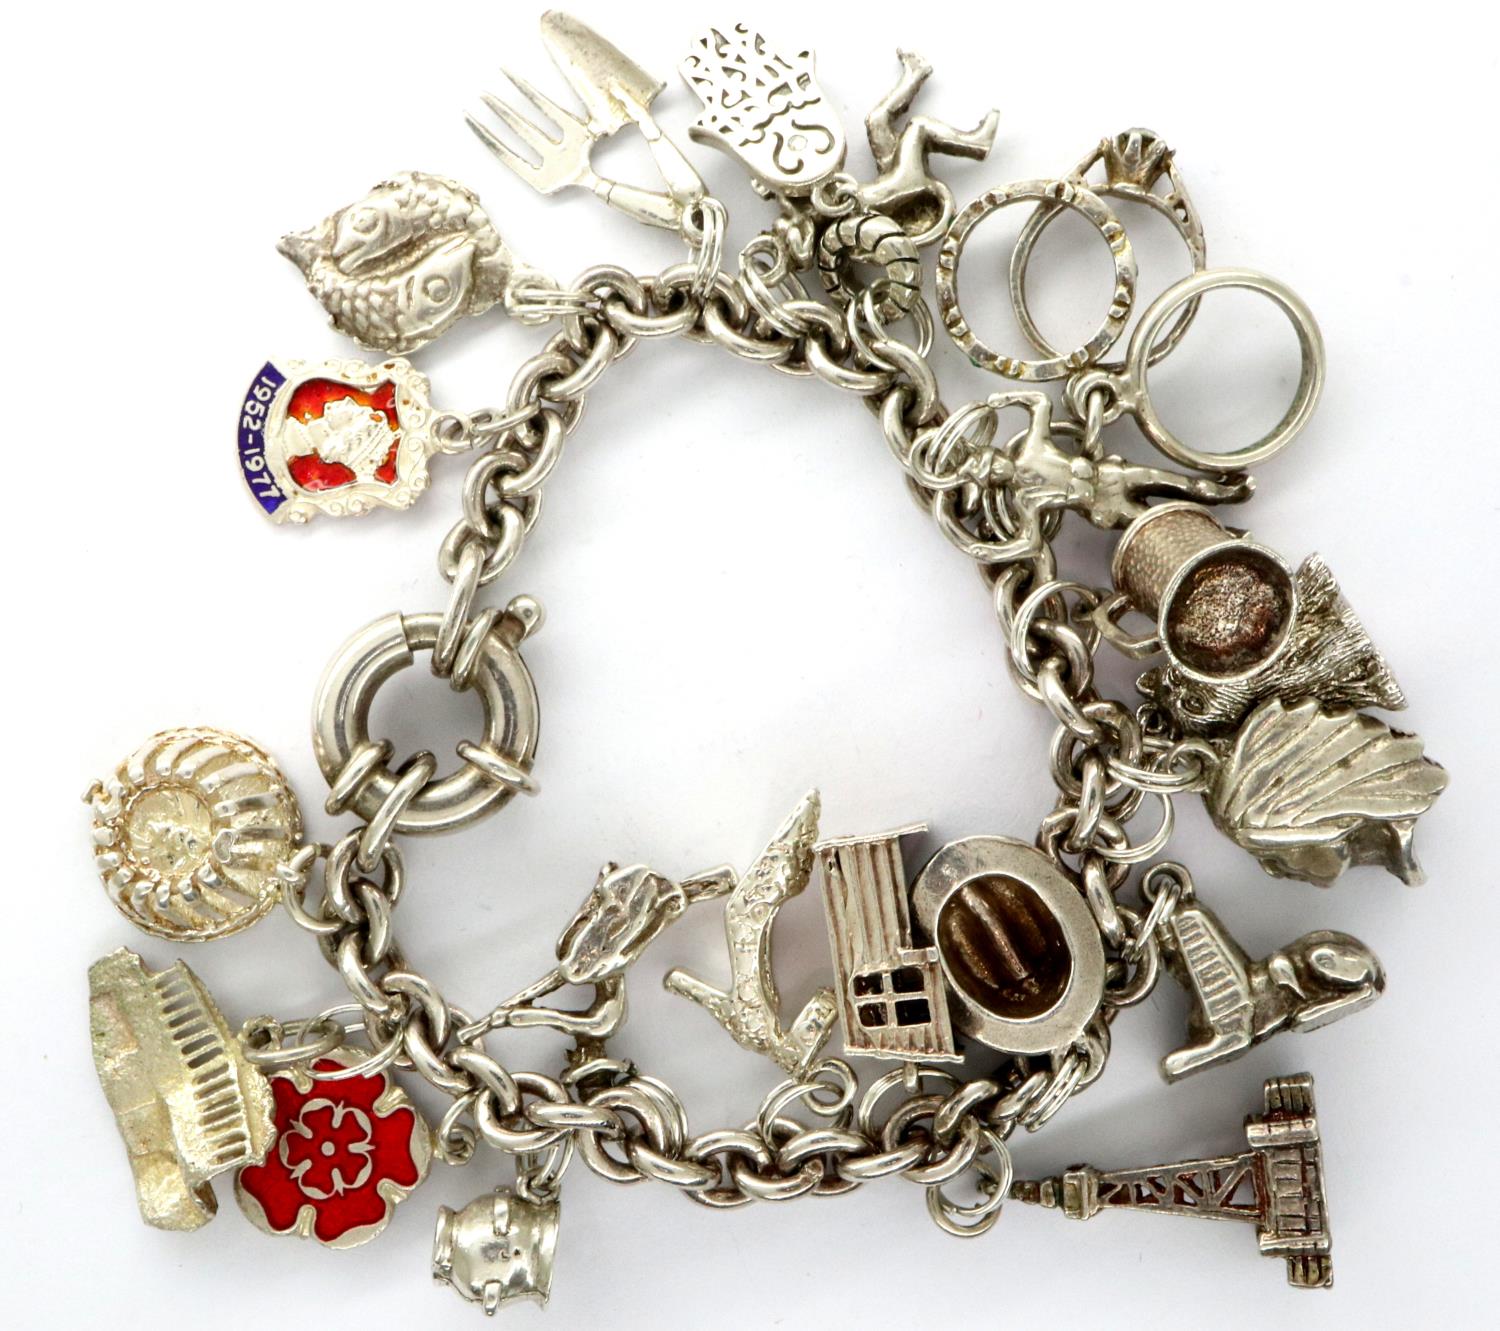 925 silver charm bracelet with twenty charms, L: 18 cm, combined 67g. P&P Group 1 (£14+VAT for the